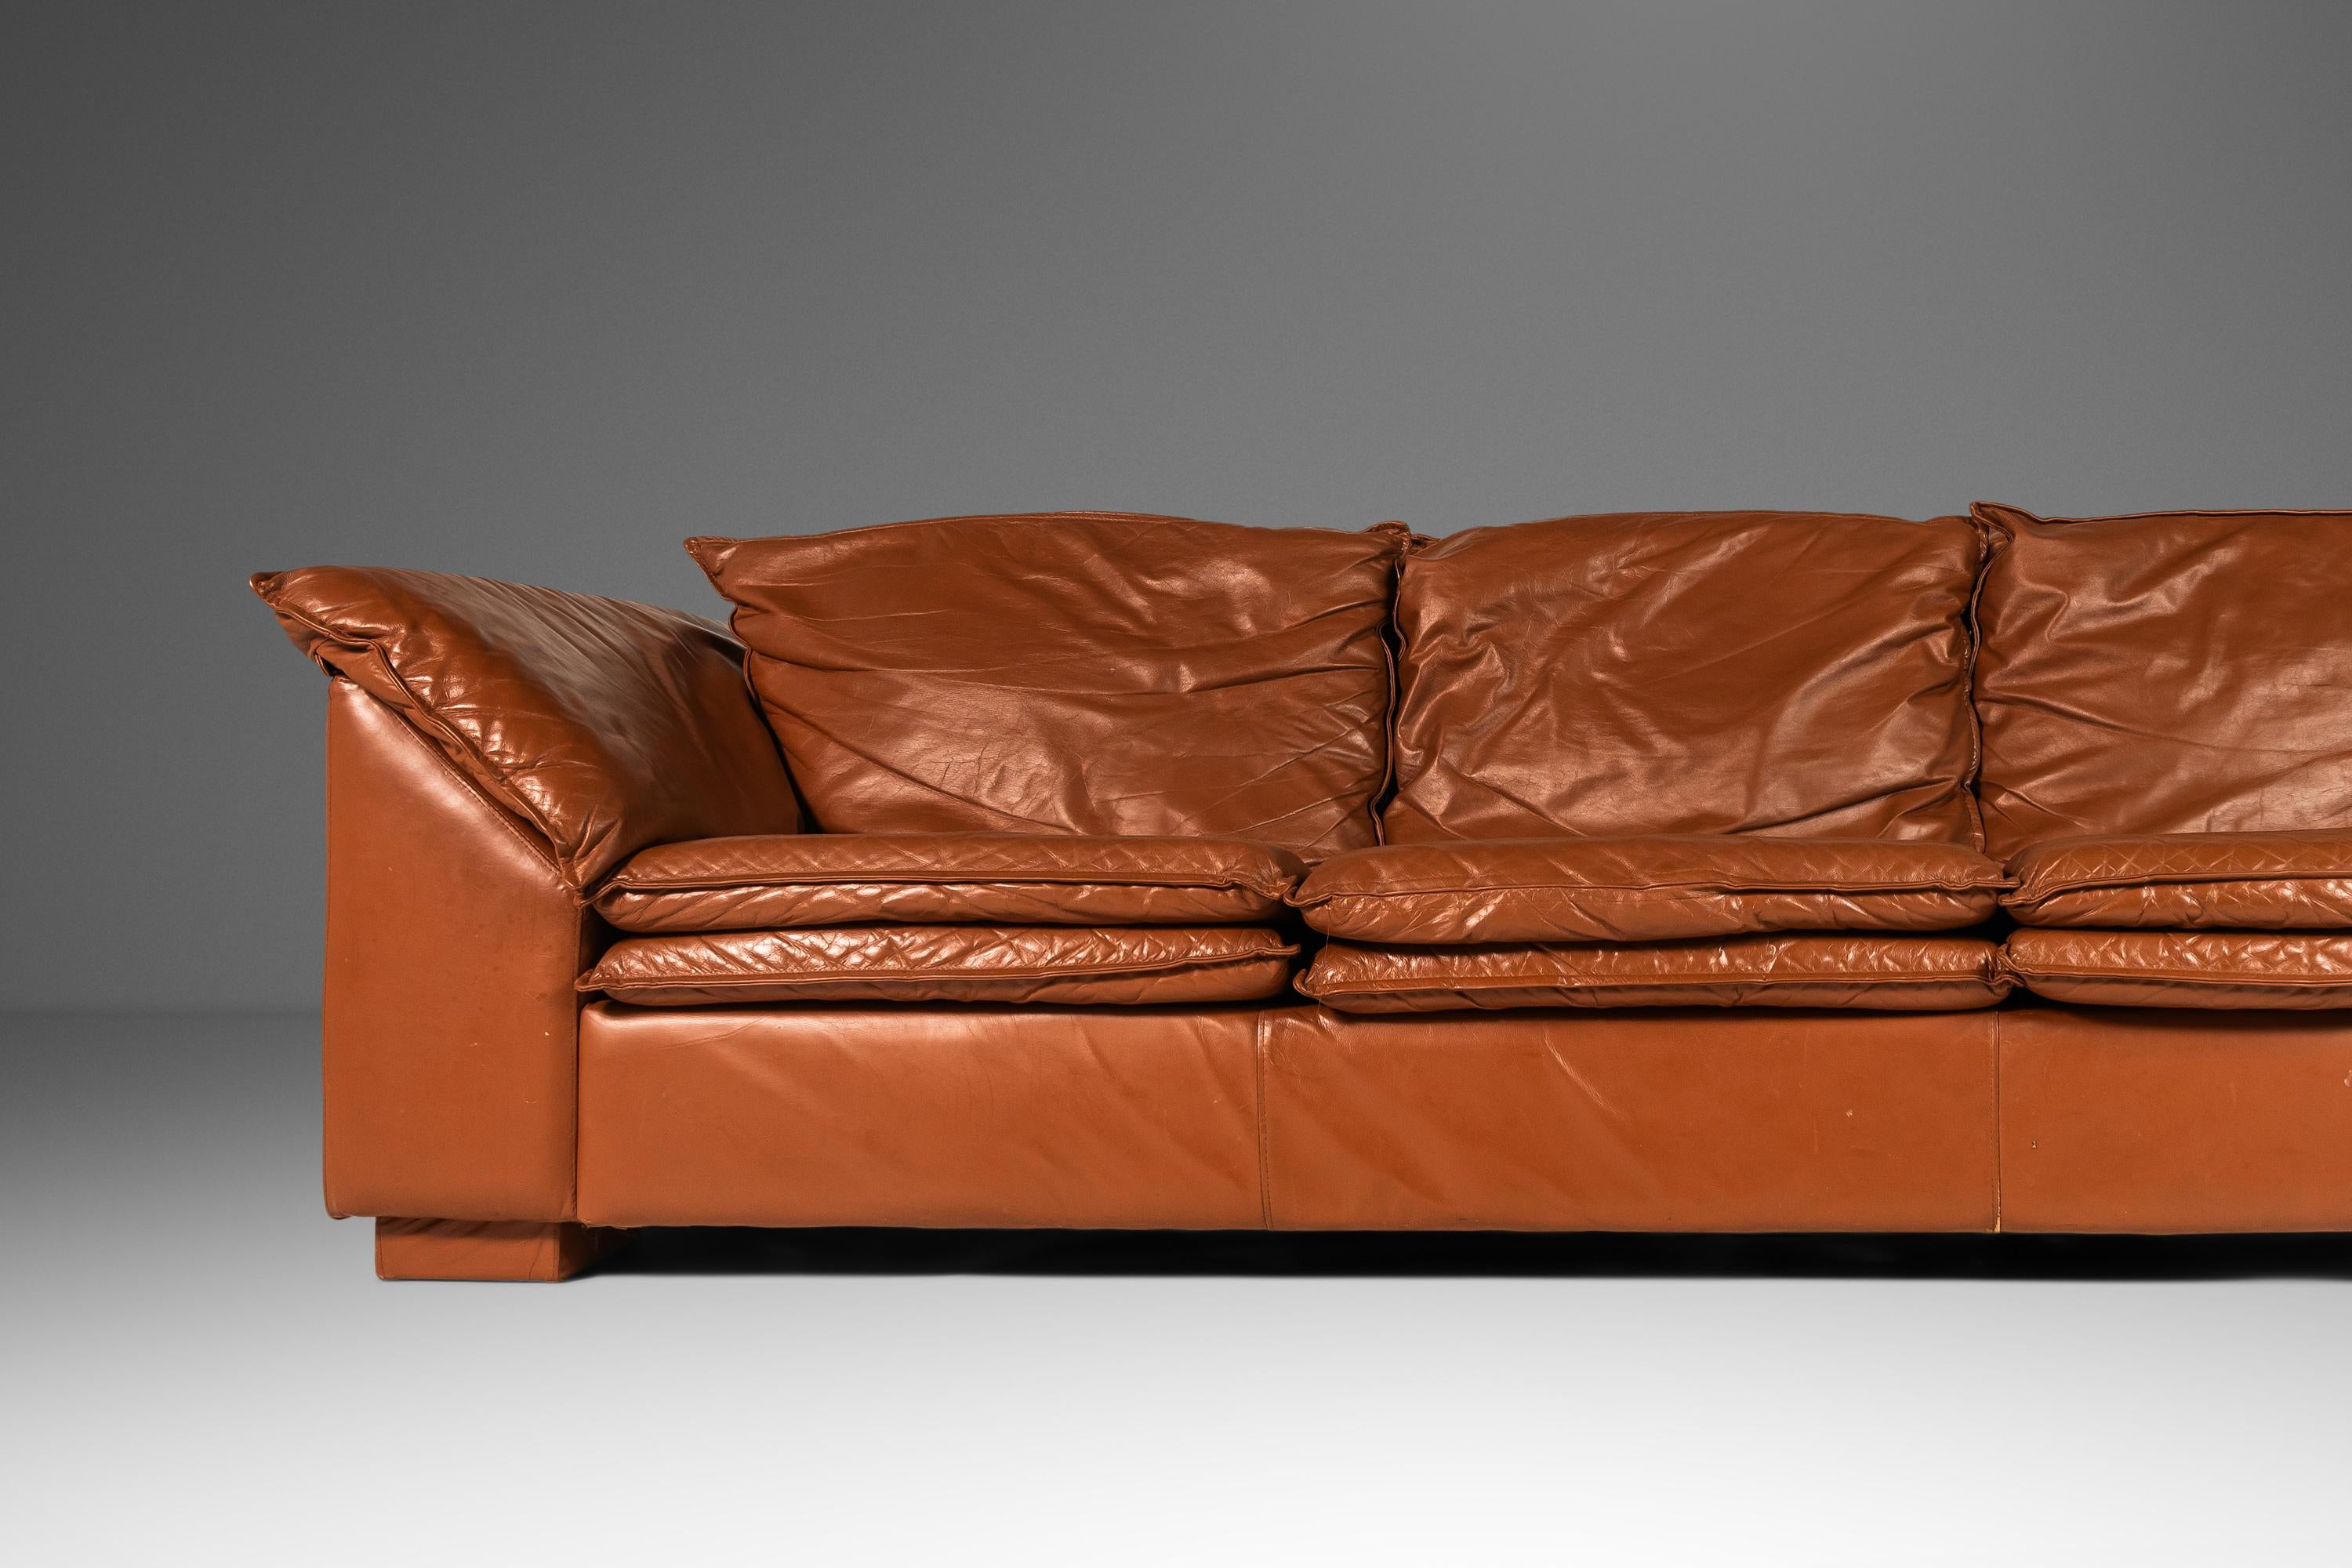 Low Profile Sofa in Cognac Brown Leather in the Manner of Niels Eilersen, 1980's For Sale 6